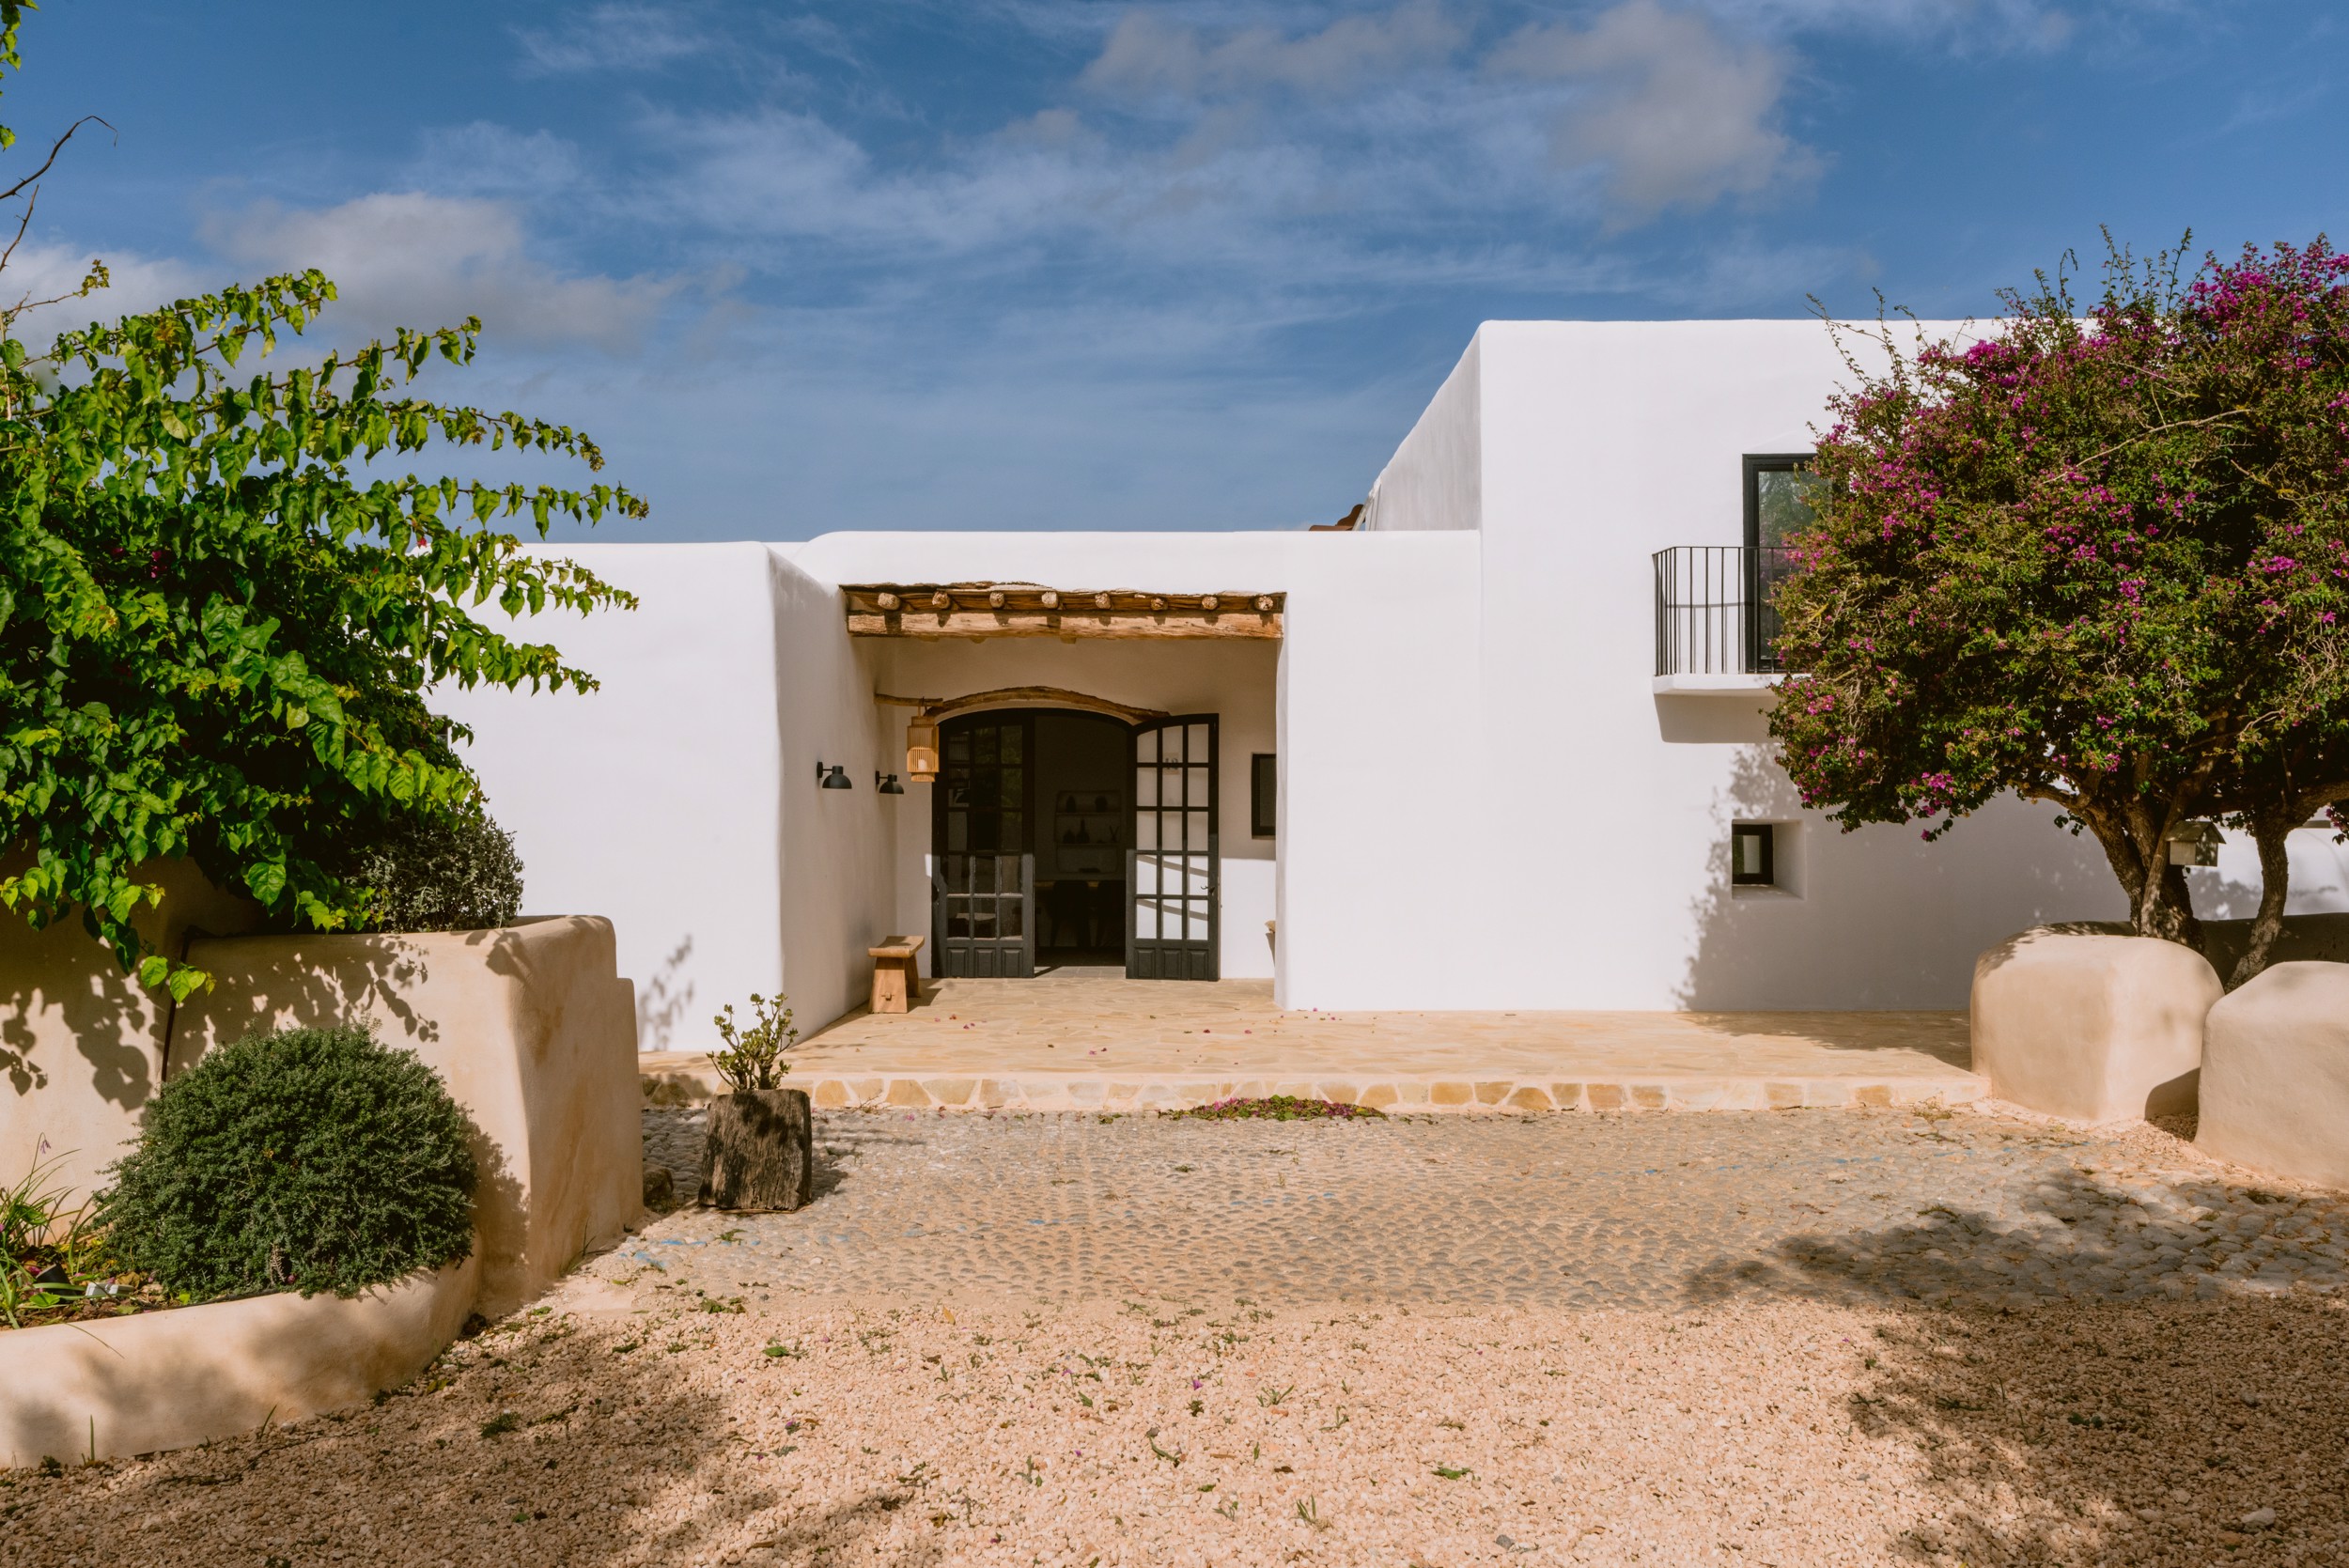 Impeccably restored traditional finca with spacious casita 